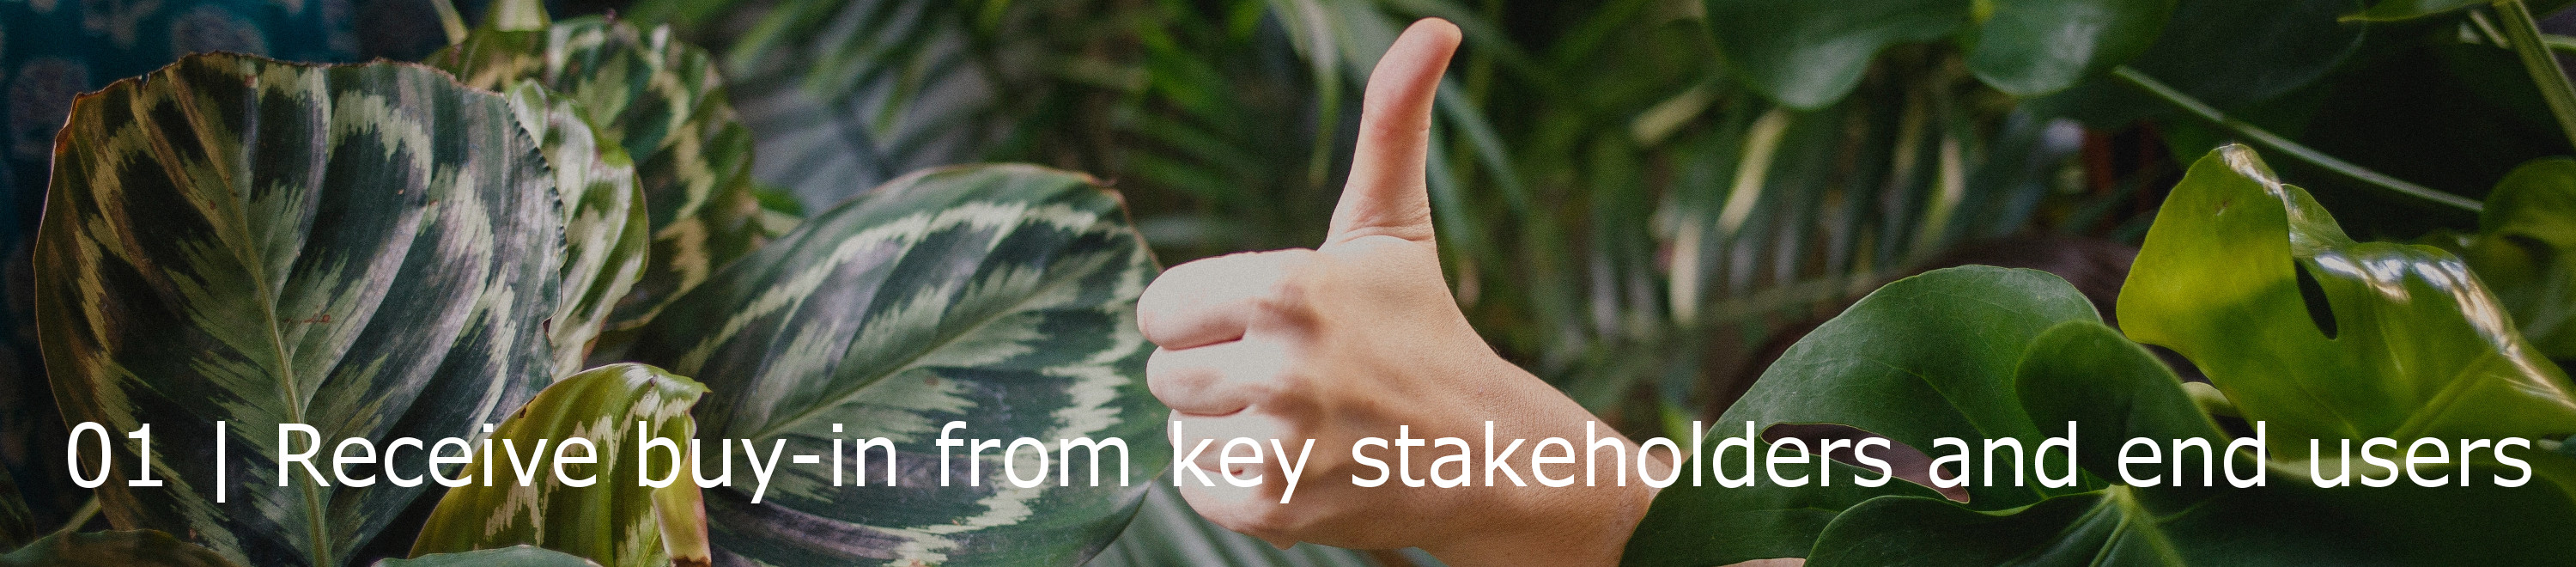 "01 | Receive buy-in from key stakeholders and end users" - A hand sticking out from a broad leafed plant gives a thumbs-up